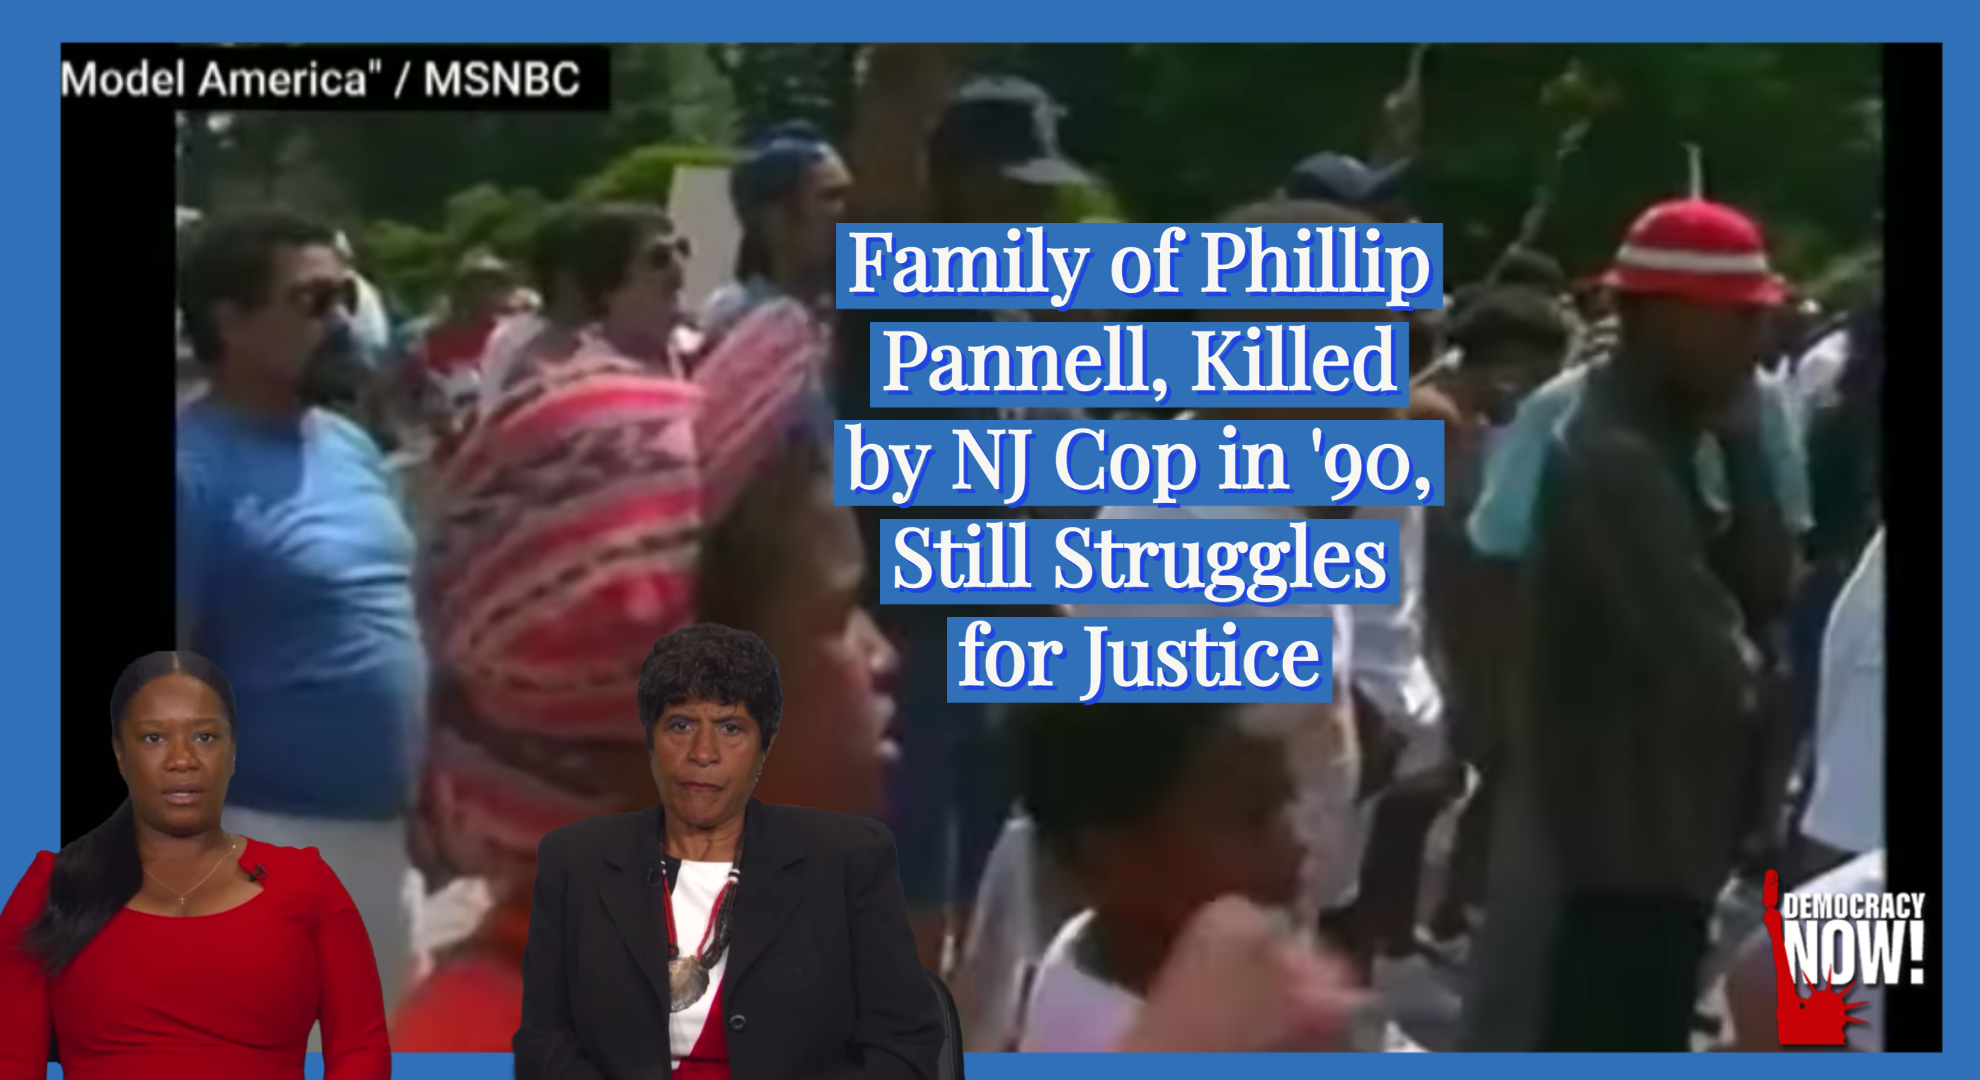 "Model America": Family of Phillip Pannell, Killed by NJ Cop in '90, Still Struggles for Justice